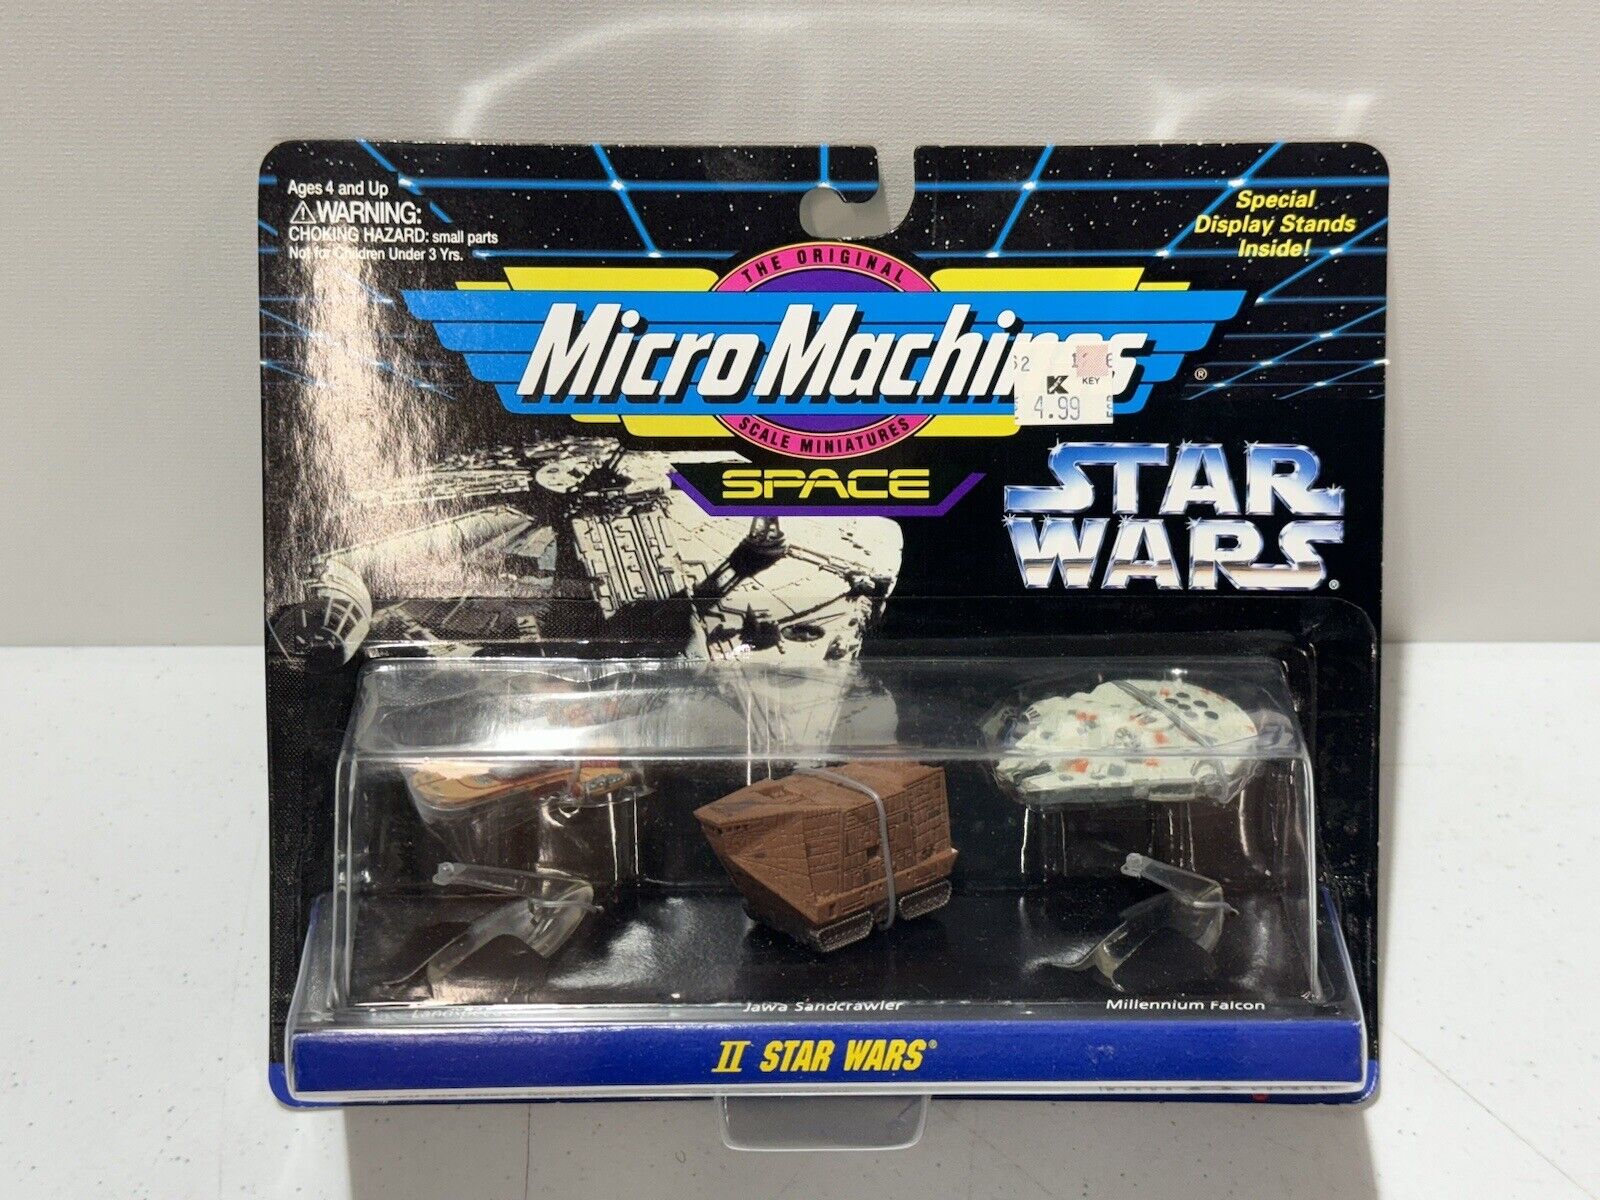 Micro Machines STAR WARS II Star Wars Gift Set Galoob 65860 from 1994 New Sealed